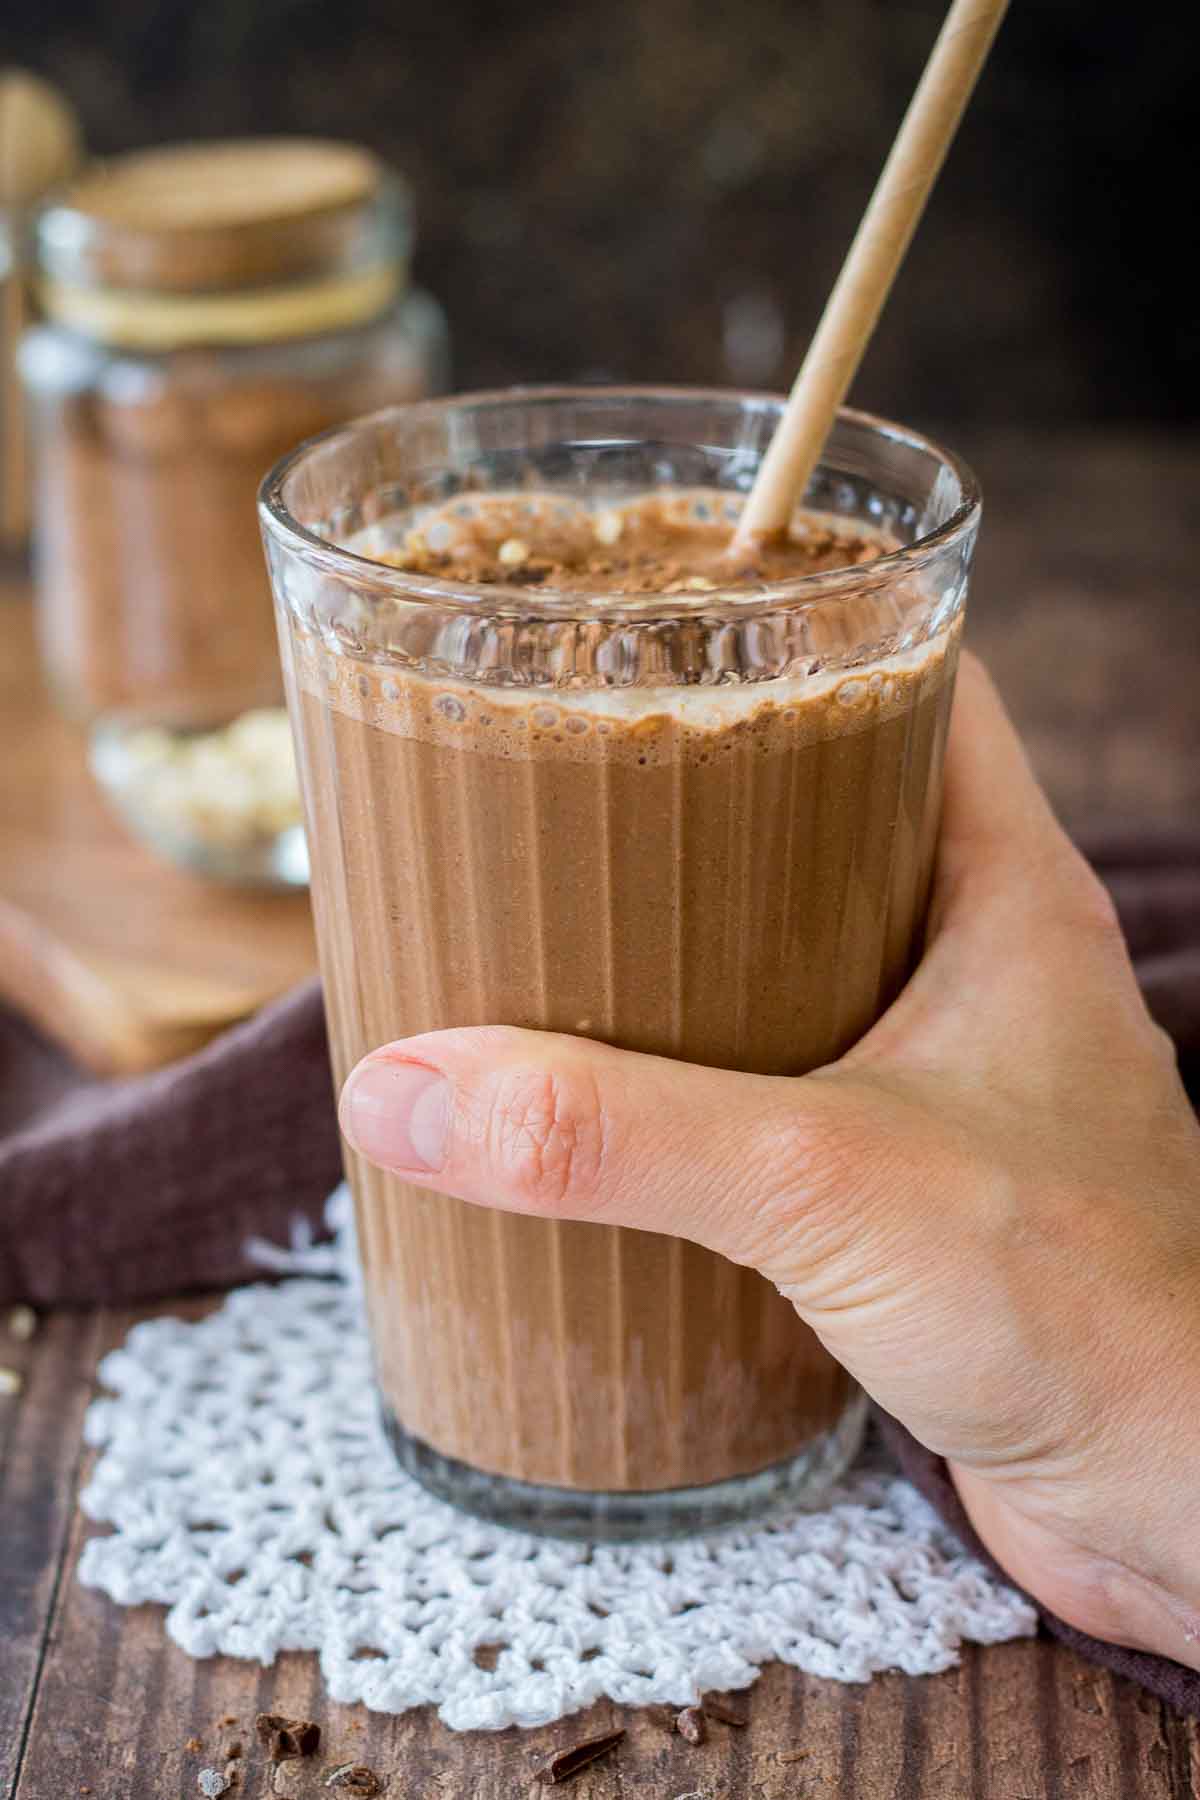 Hand holding Coffee Smoothie served in a smoothie glass with a straw